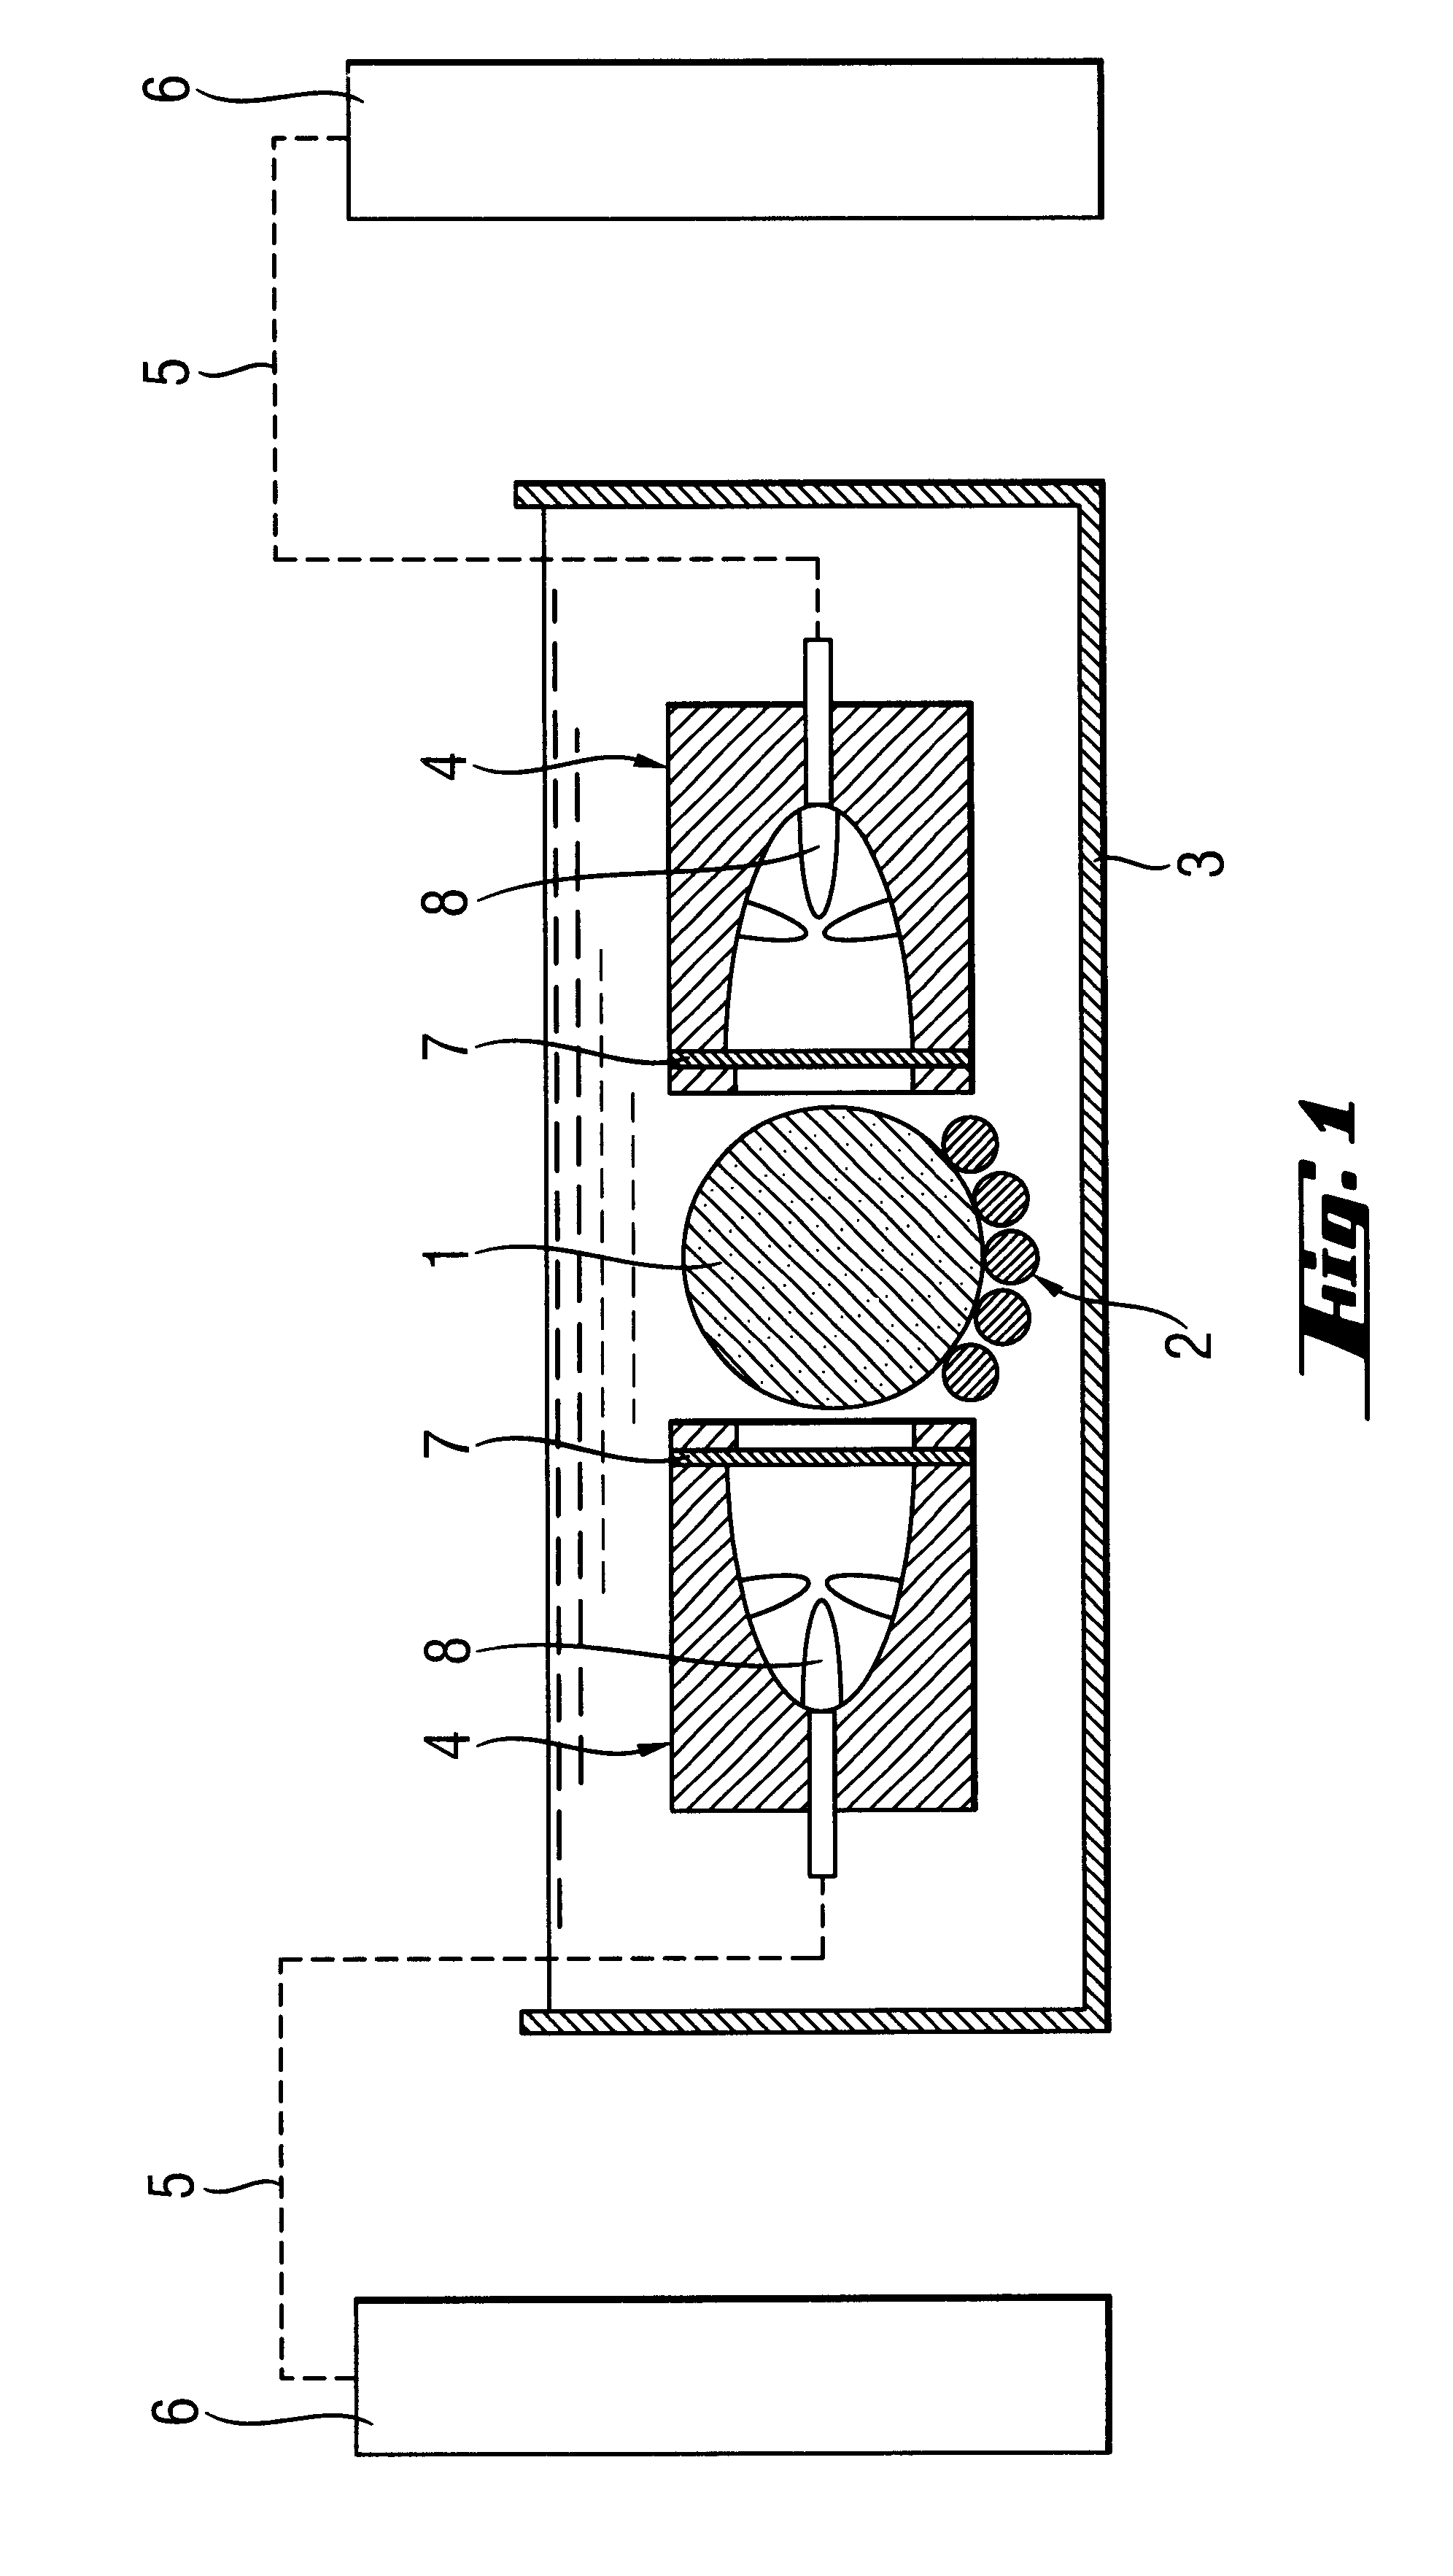 Method for processing semiconductor material